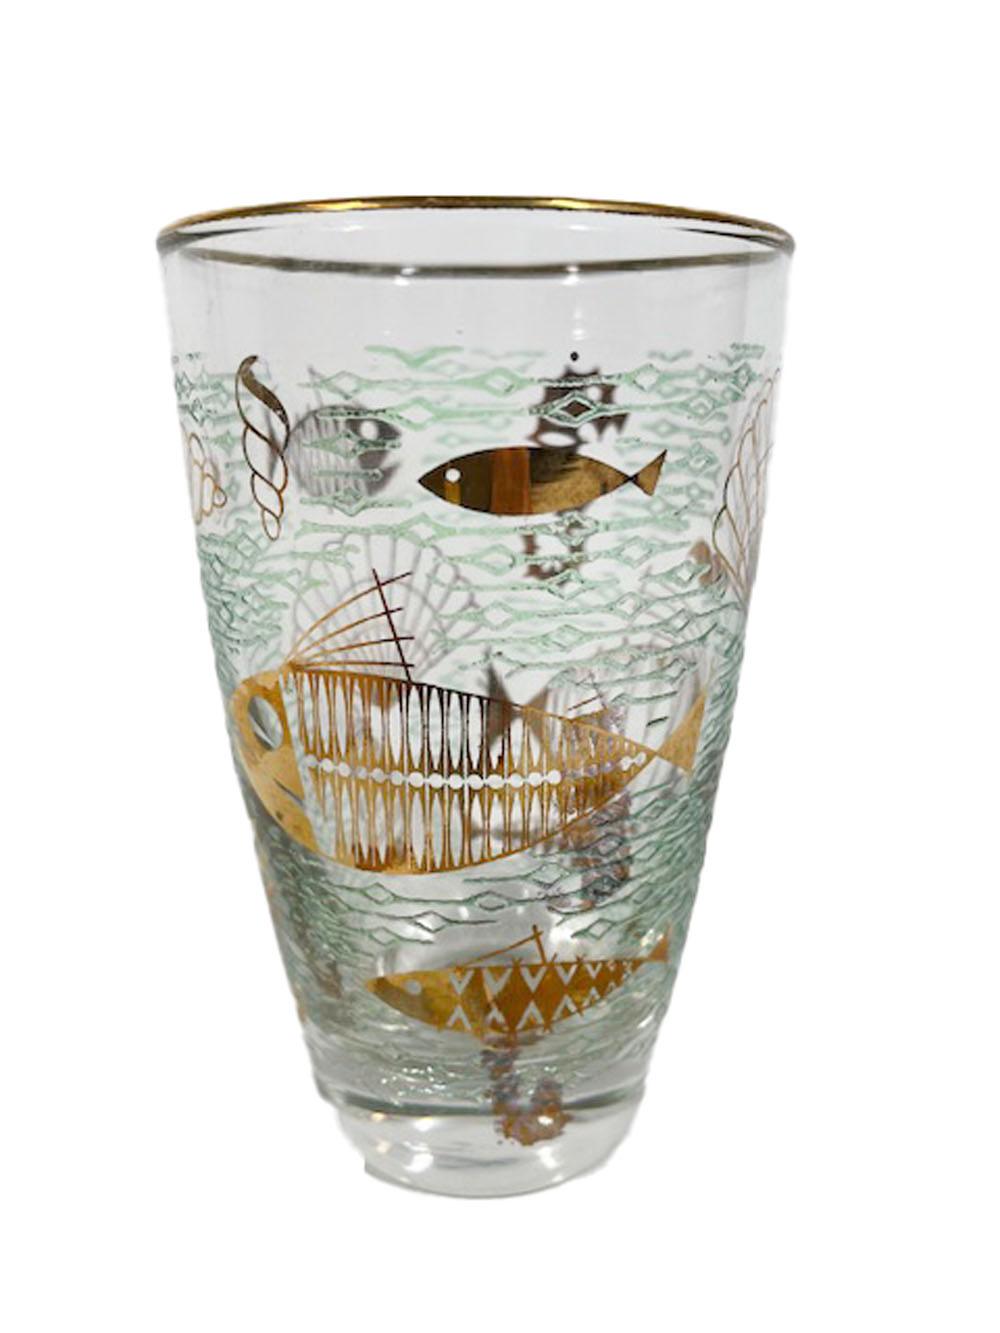 Set of 6 Libbey Glass Tumblers in the Marine Life Pattern, Discontinued in 1959 For Sale 3